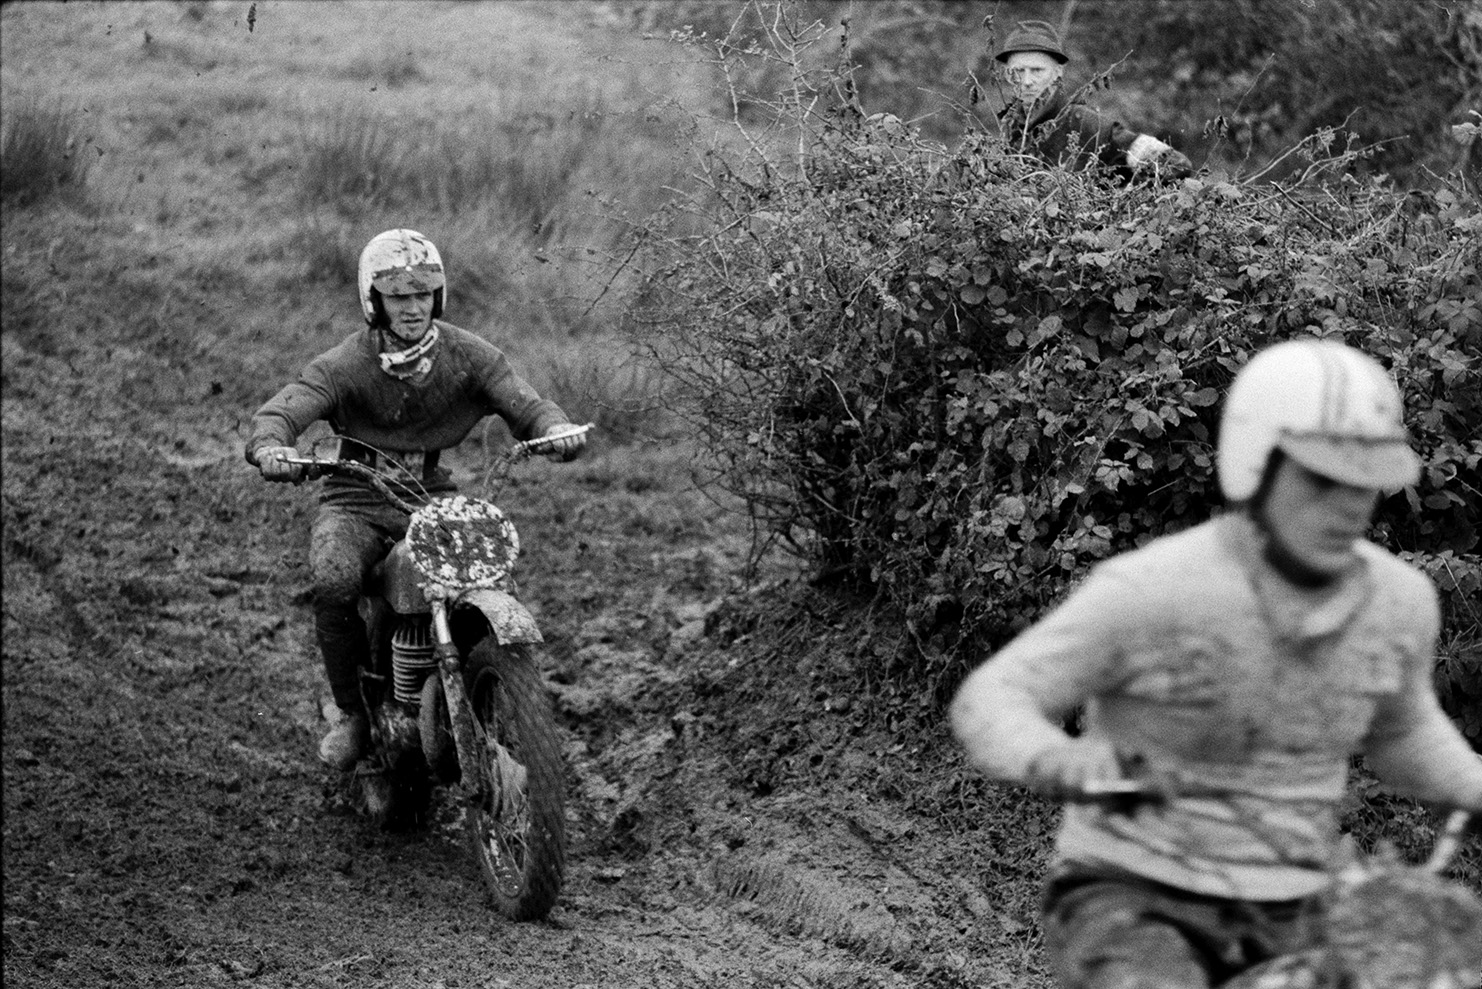 Competitors racing along a muddy course at Torrington motorbike scramble. A man is watching them over a hedge.